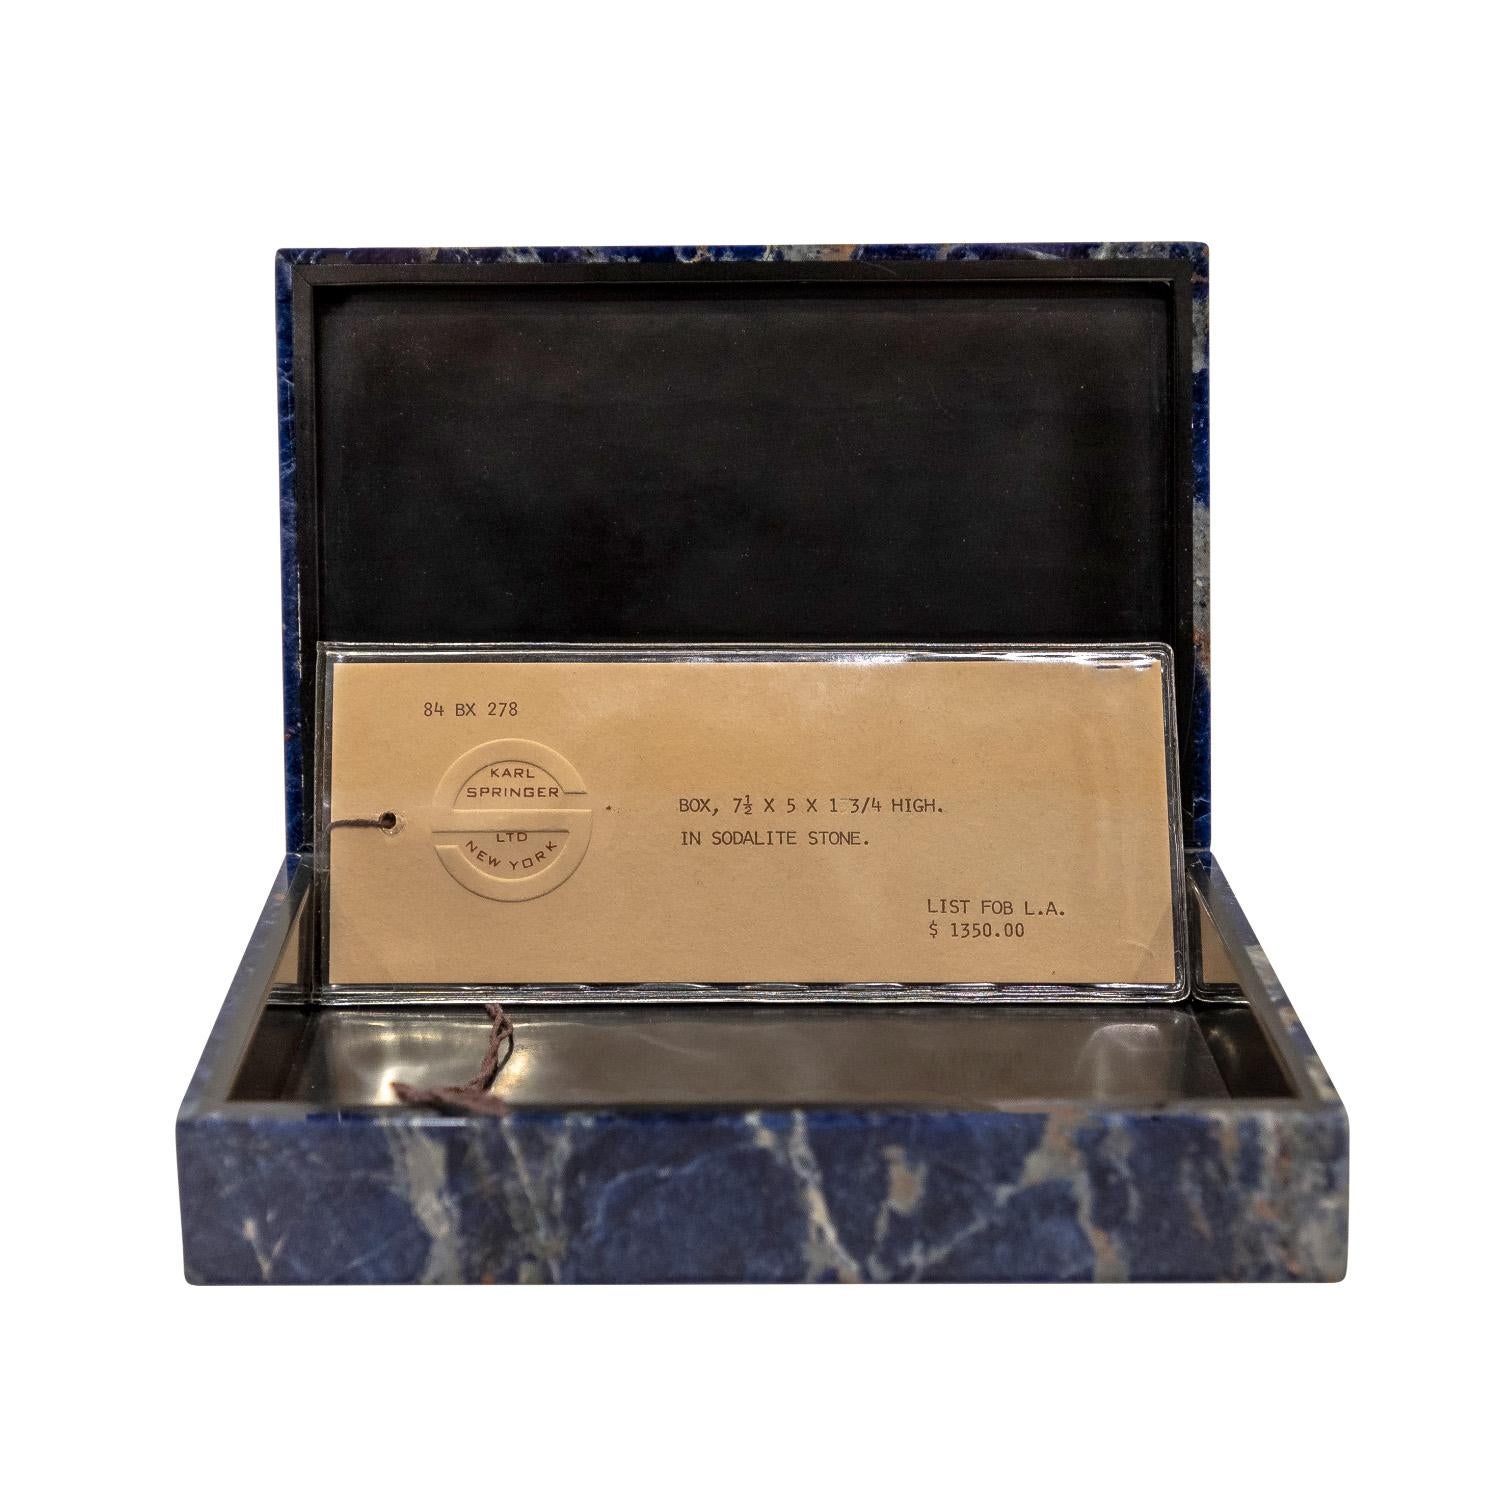 Hand-Crafted Karl Springer Unique Hinged Box in Polished Sodalite Stone 1980s 'Signed' For Sale